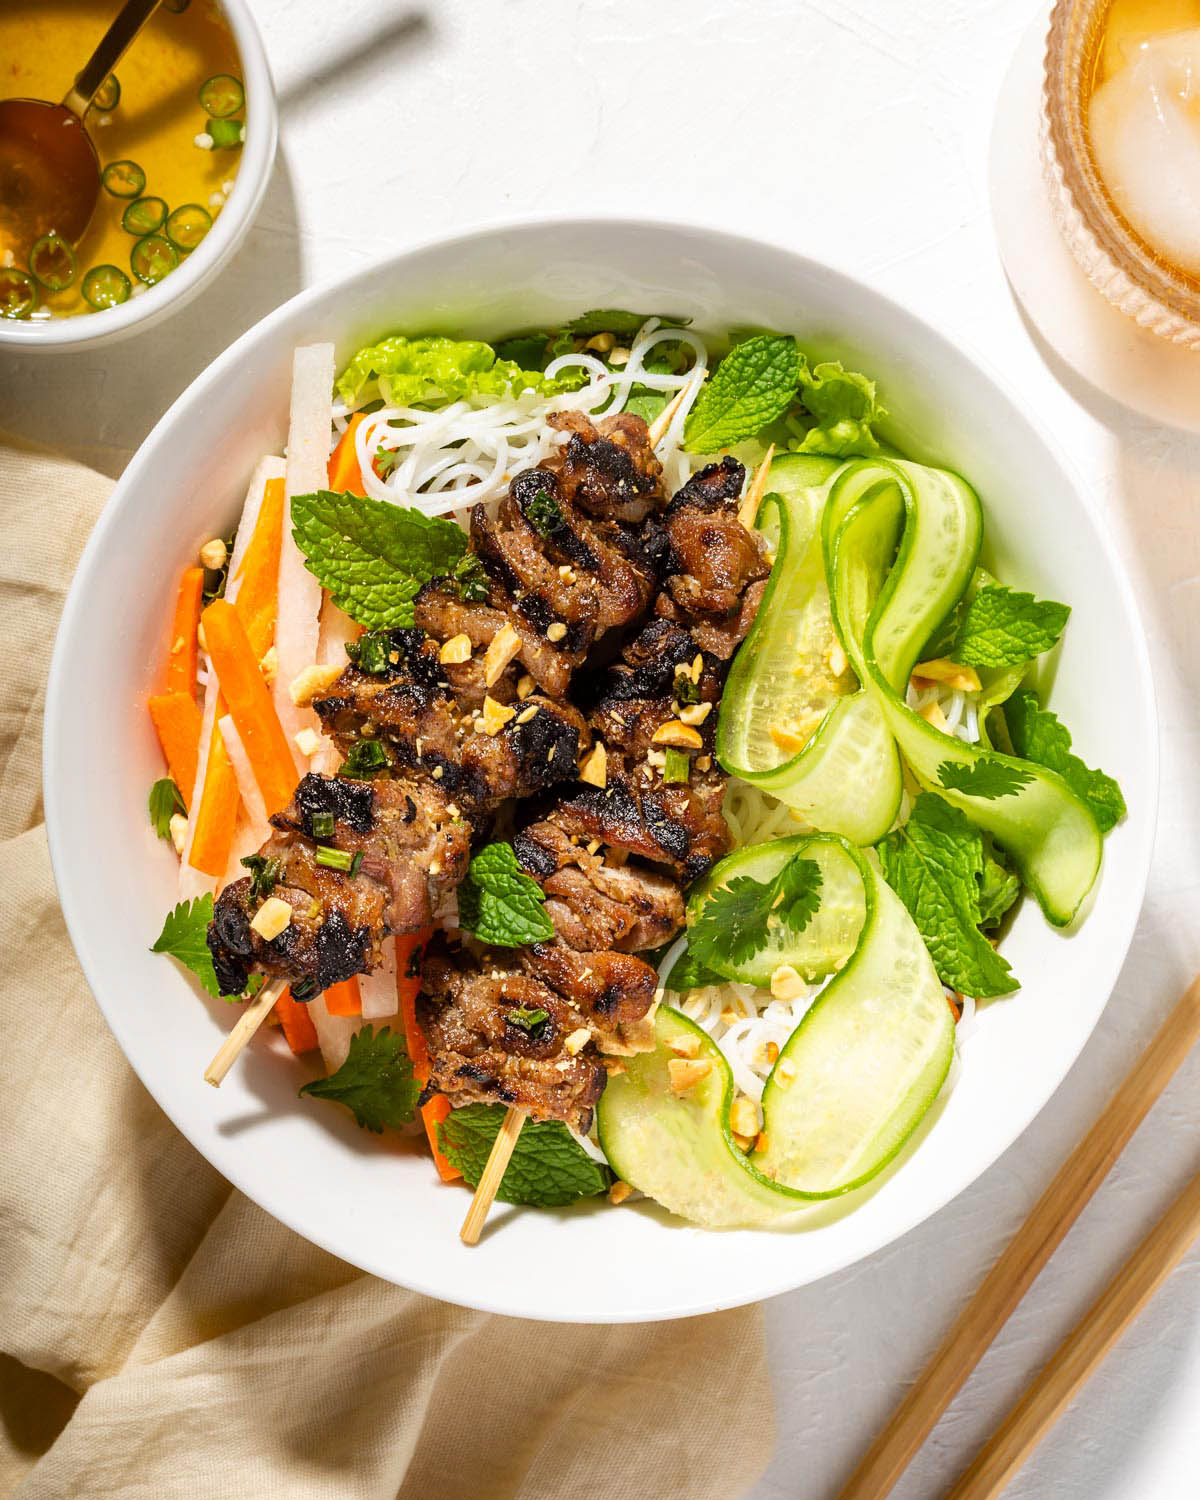 Looking down at grilled Vietnamese pork plated in a bowl.